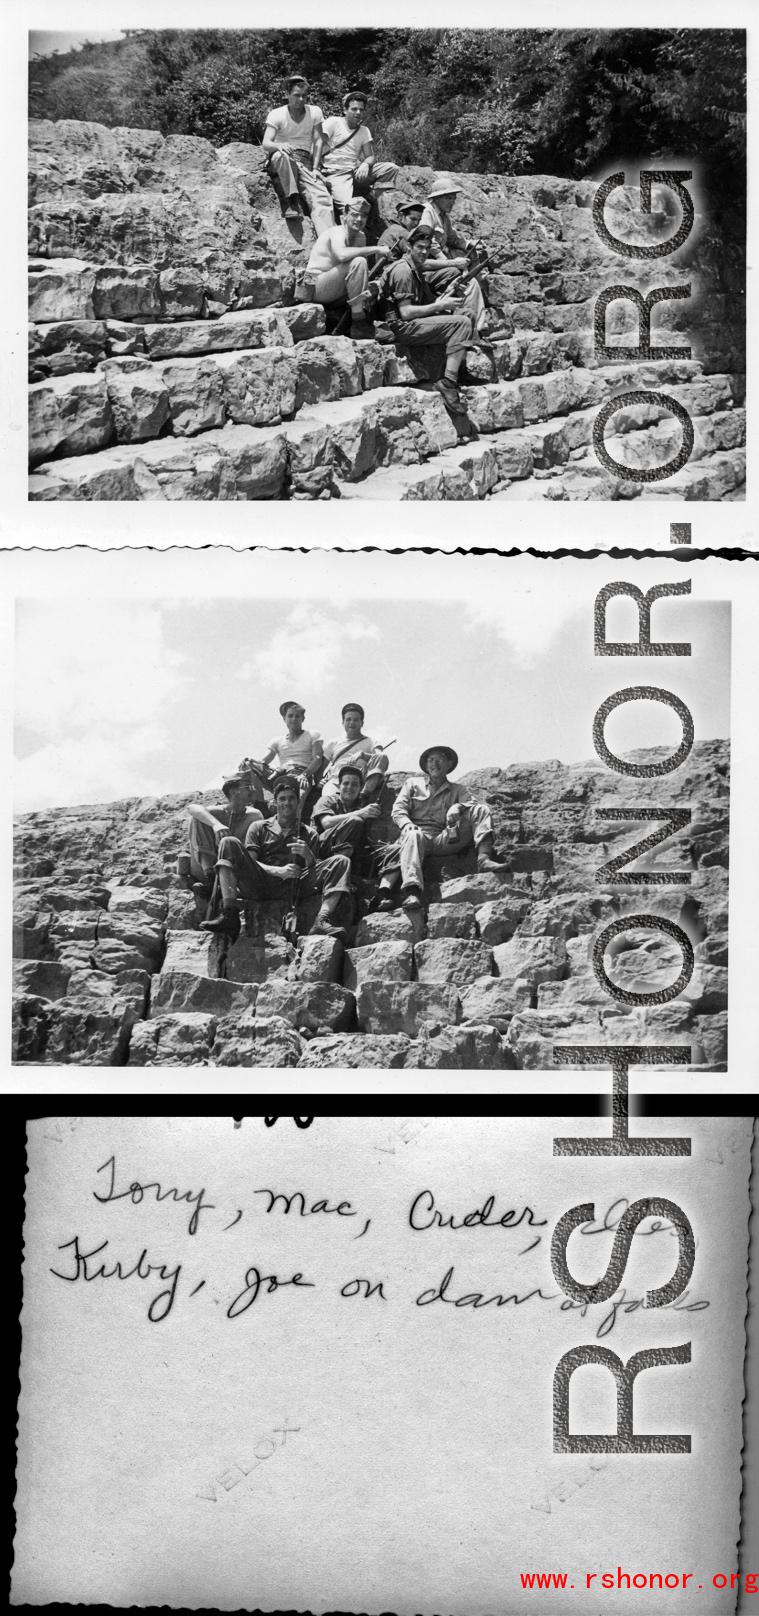 "Tony, Mac, Crider, Elles, Kirby, Joe, on dam at falls."  A dam and and falls about 8 miles southeast of the Luliang air base area in Yunnan province, China, where the GIs went to swim and relax. During WWII.